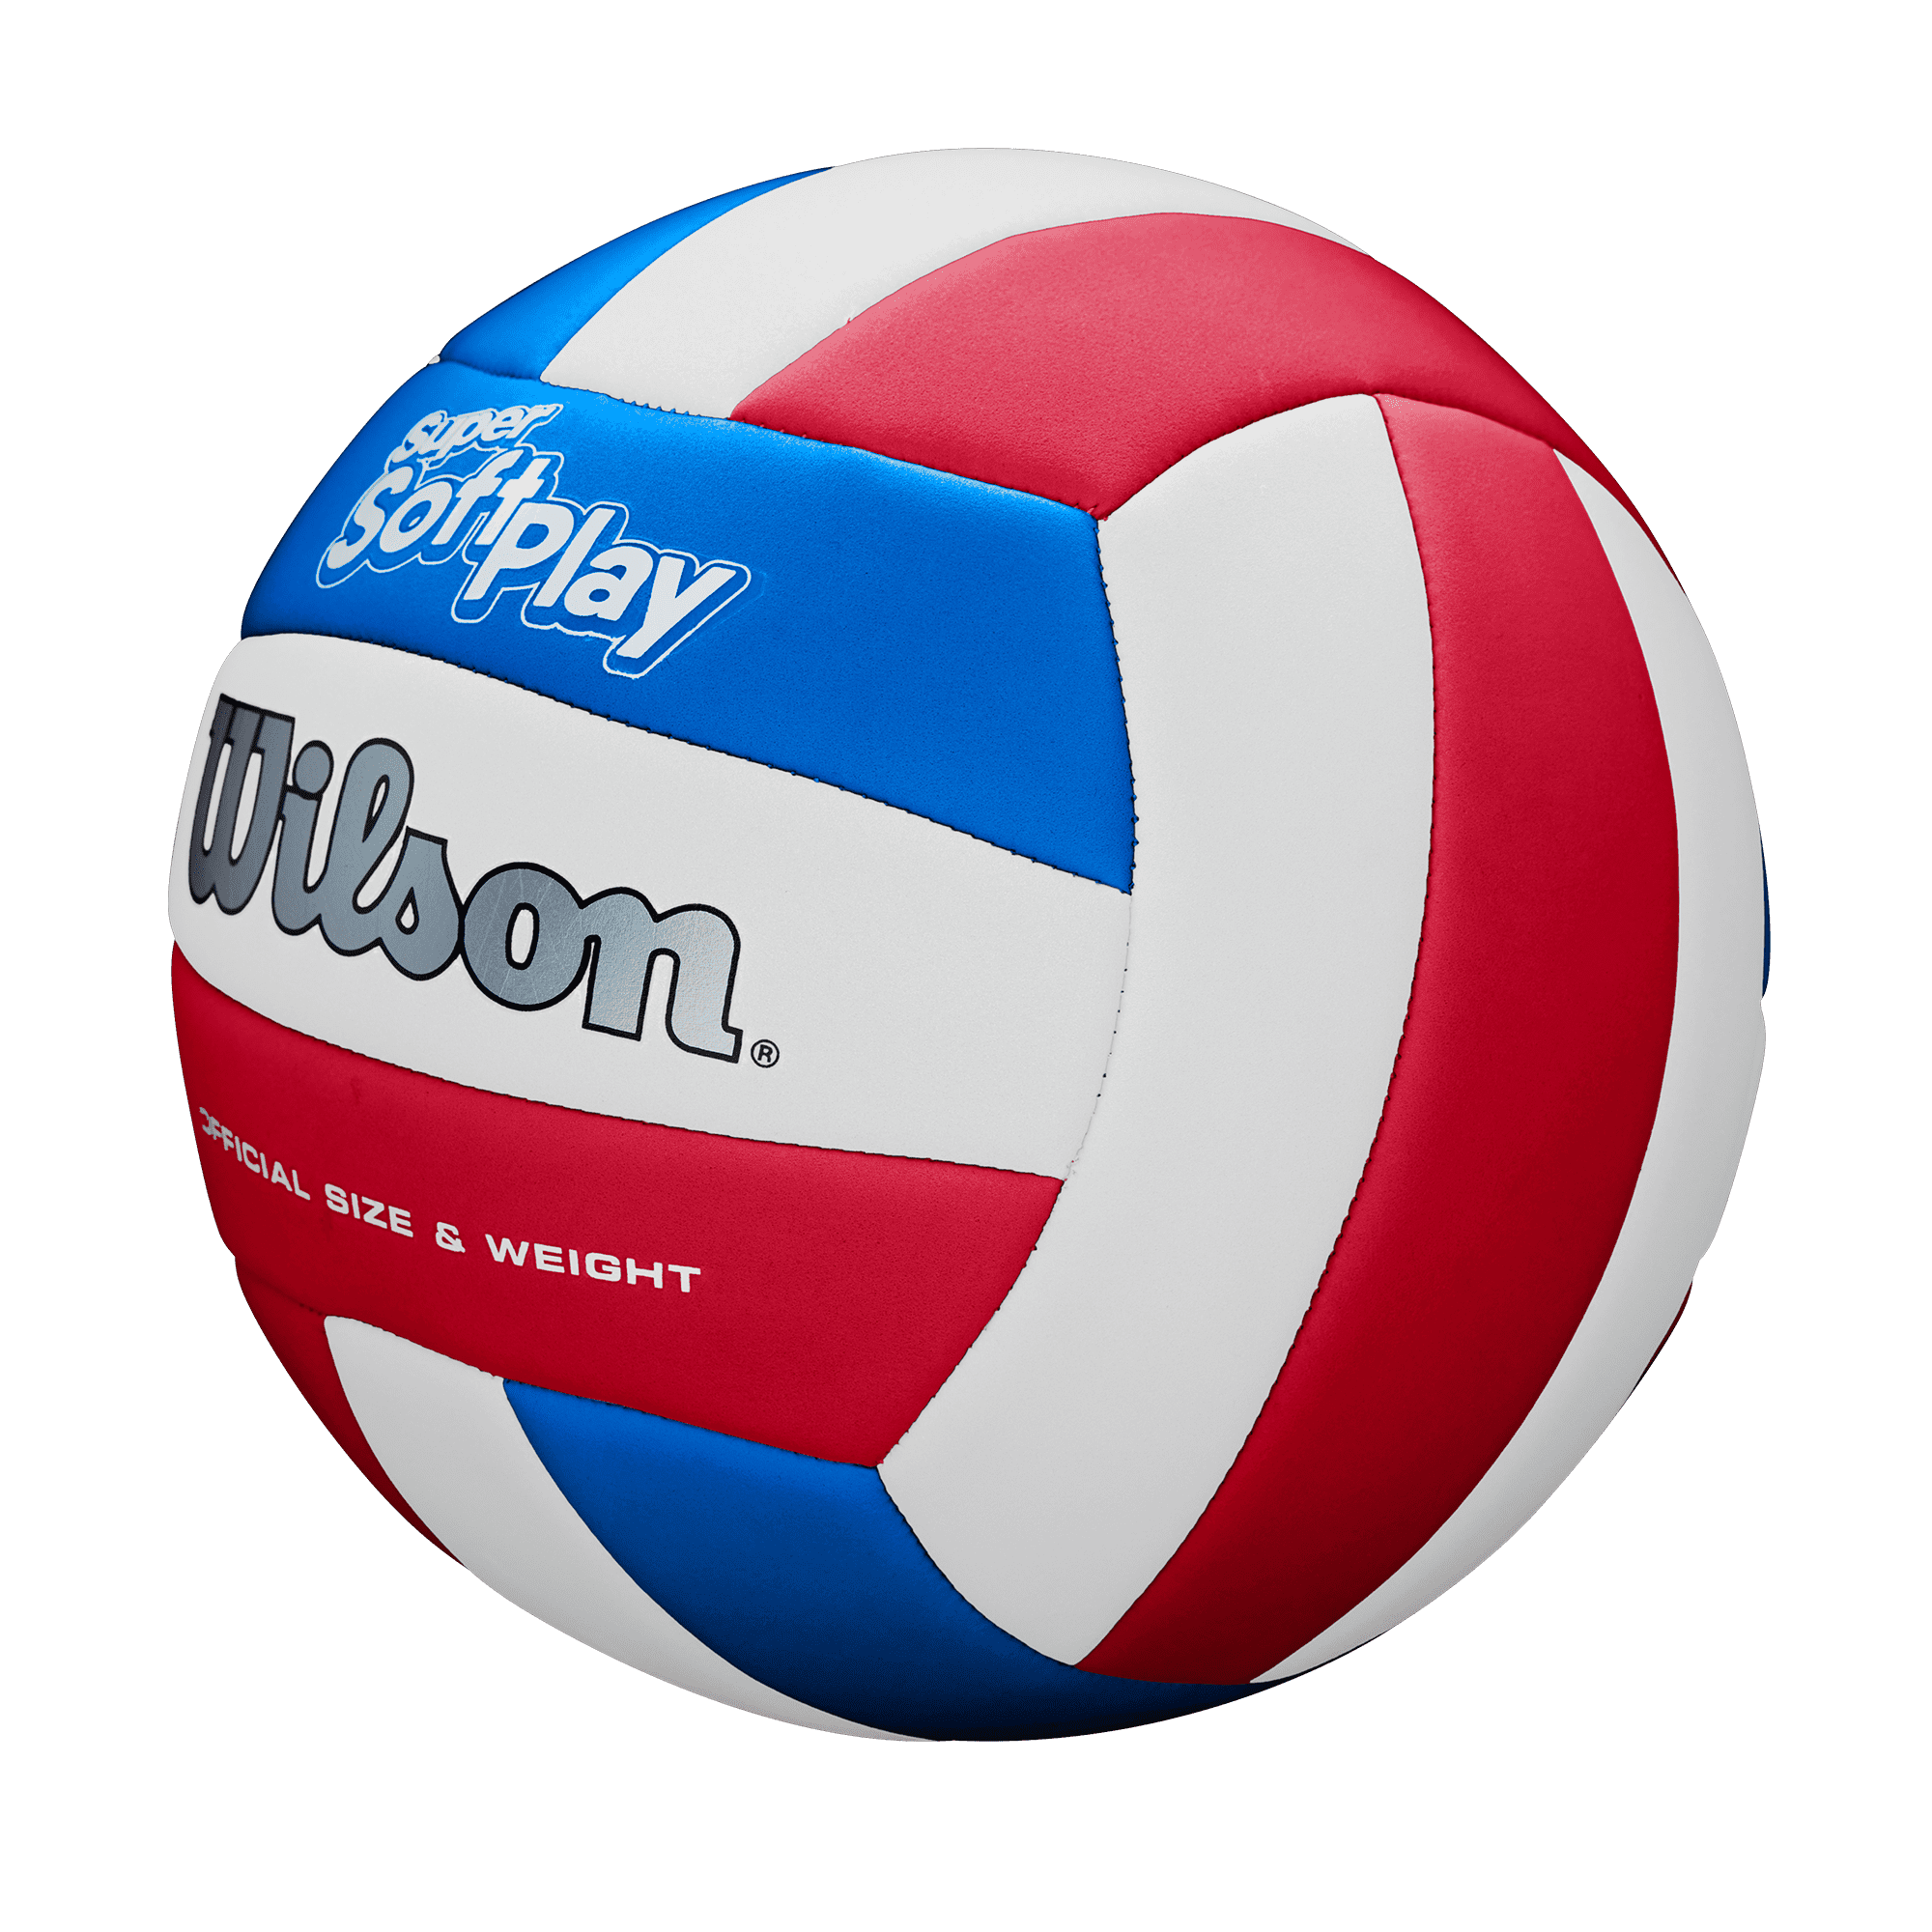 WILSON Super Soft Play Volleyball Official Size 